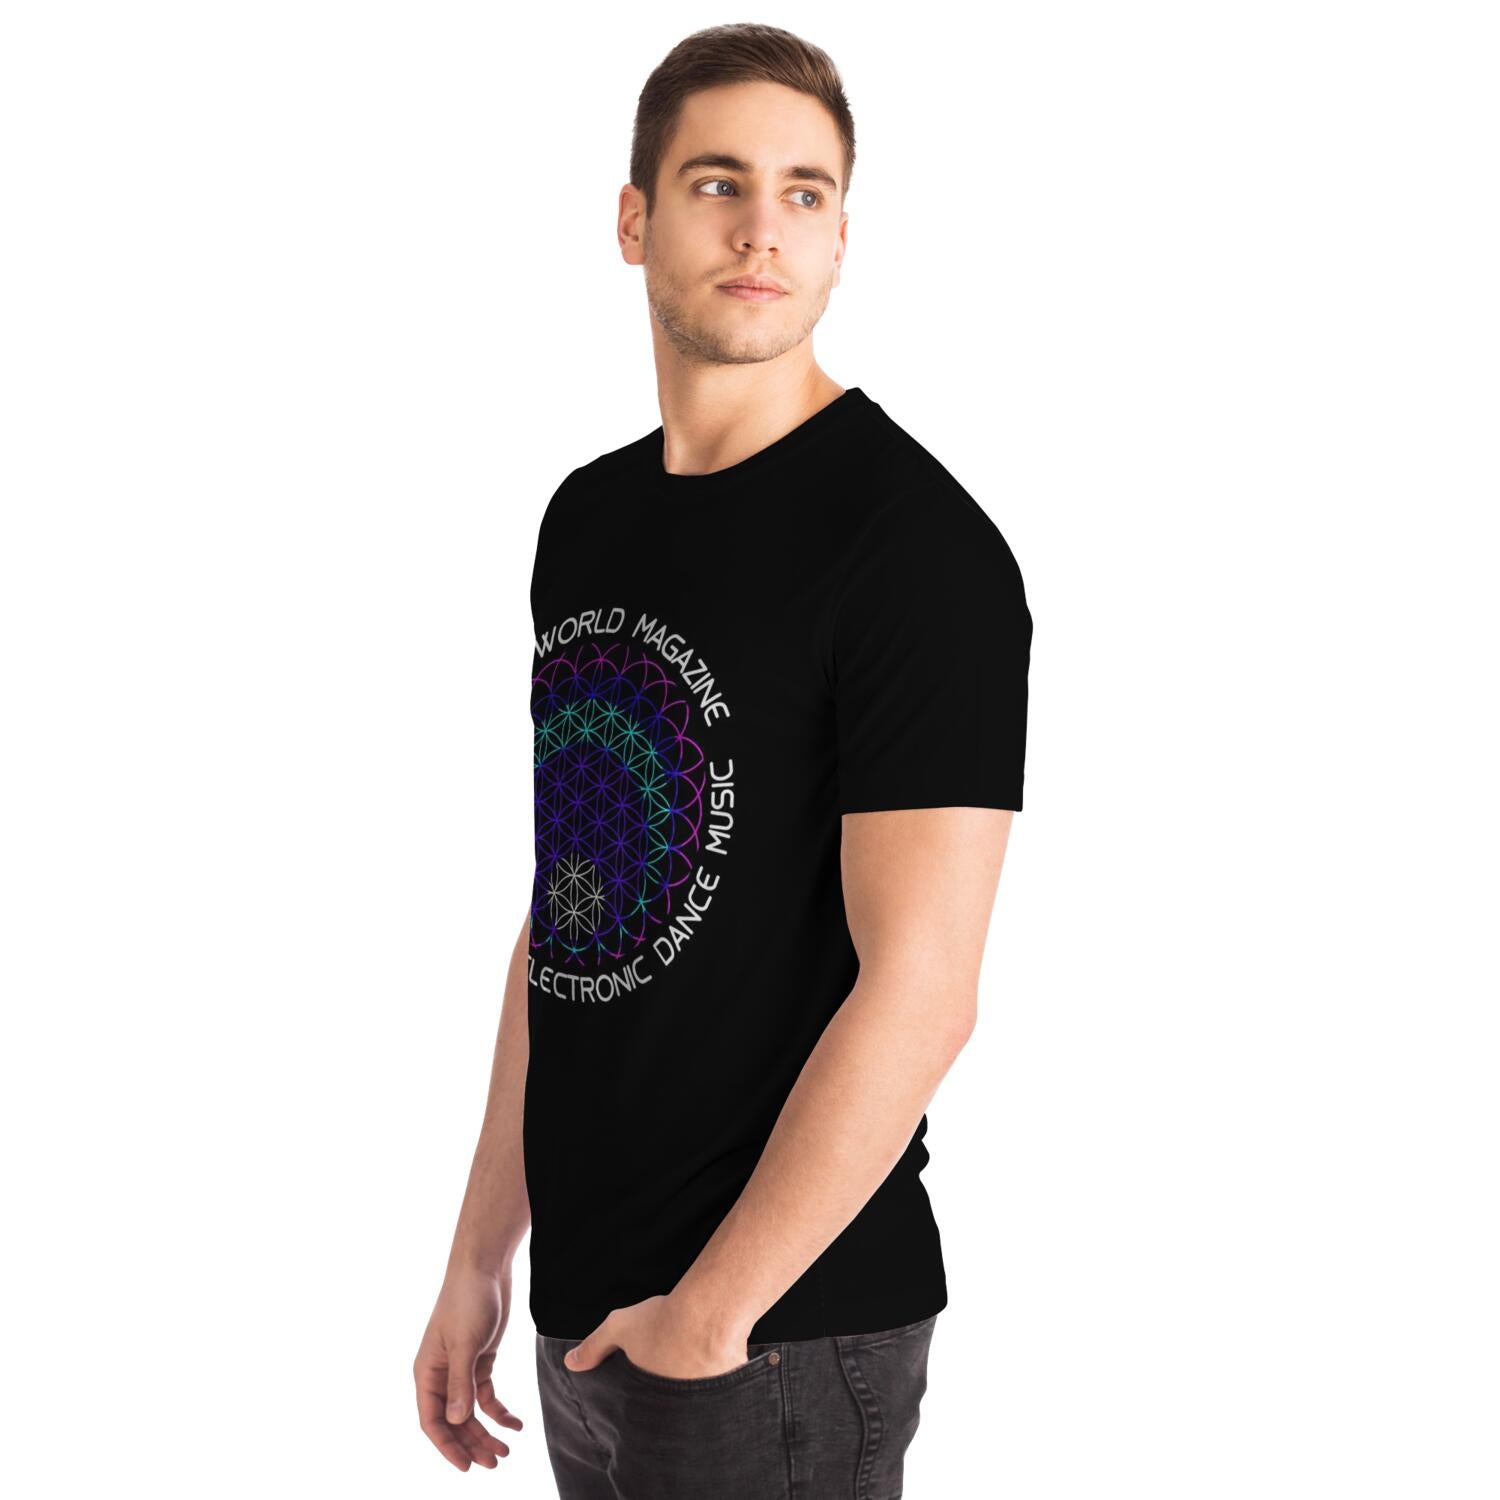 Flower of Life Laser Show Tee